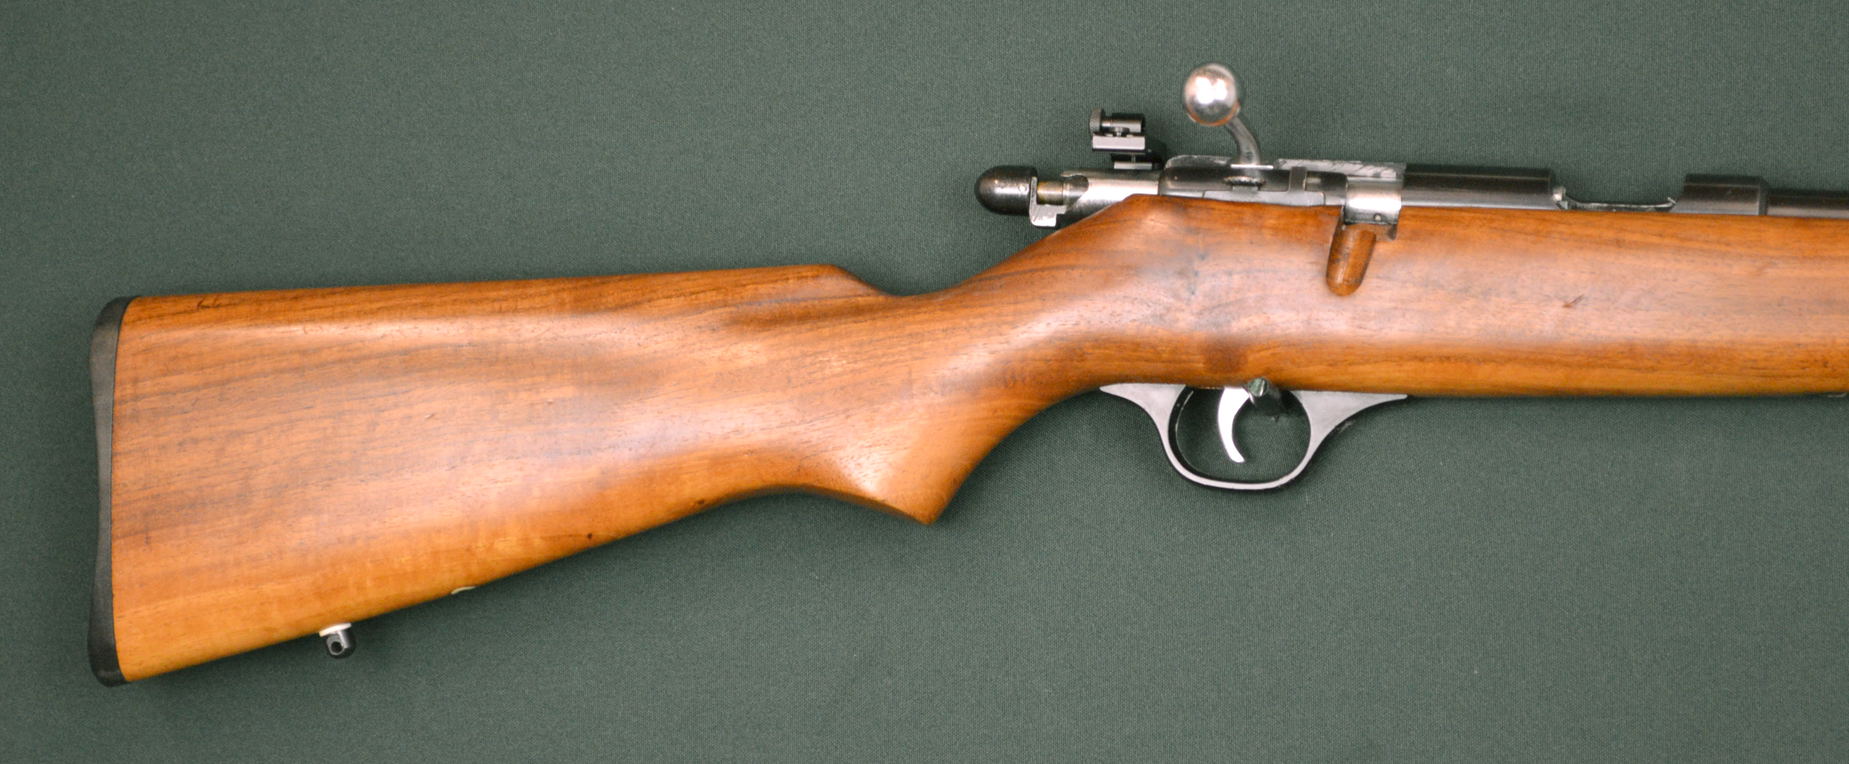 Marlin Model Xl Bolt Action Rifle For Sale At Gunauction My Xxx